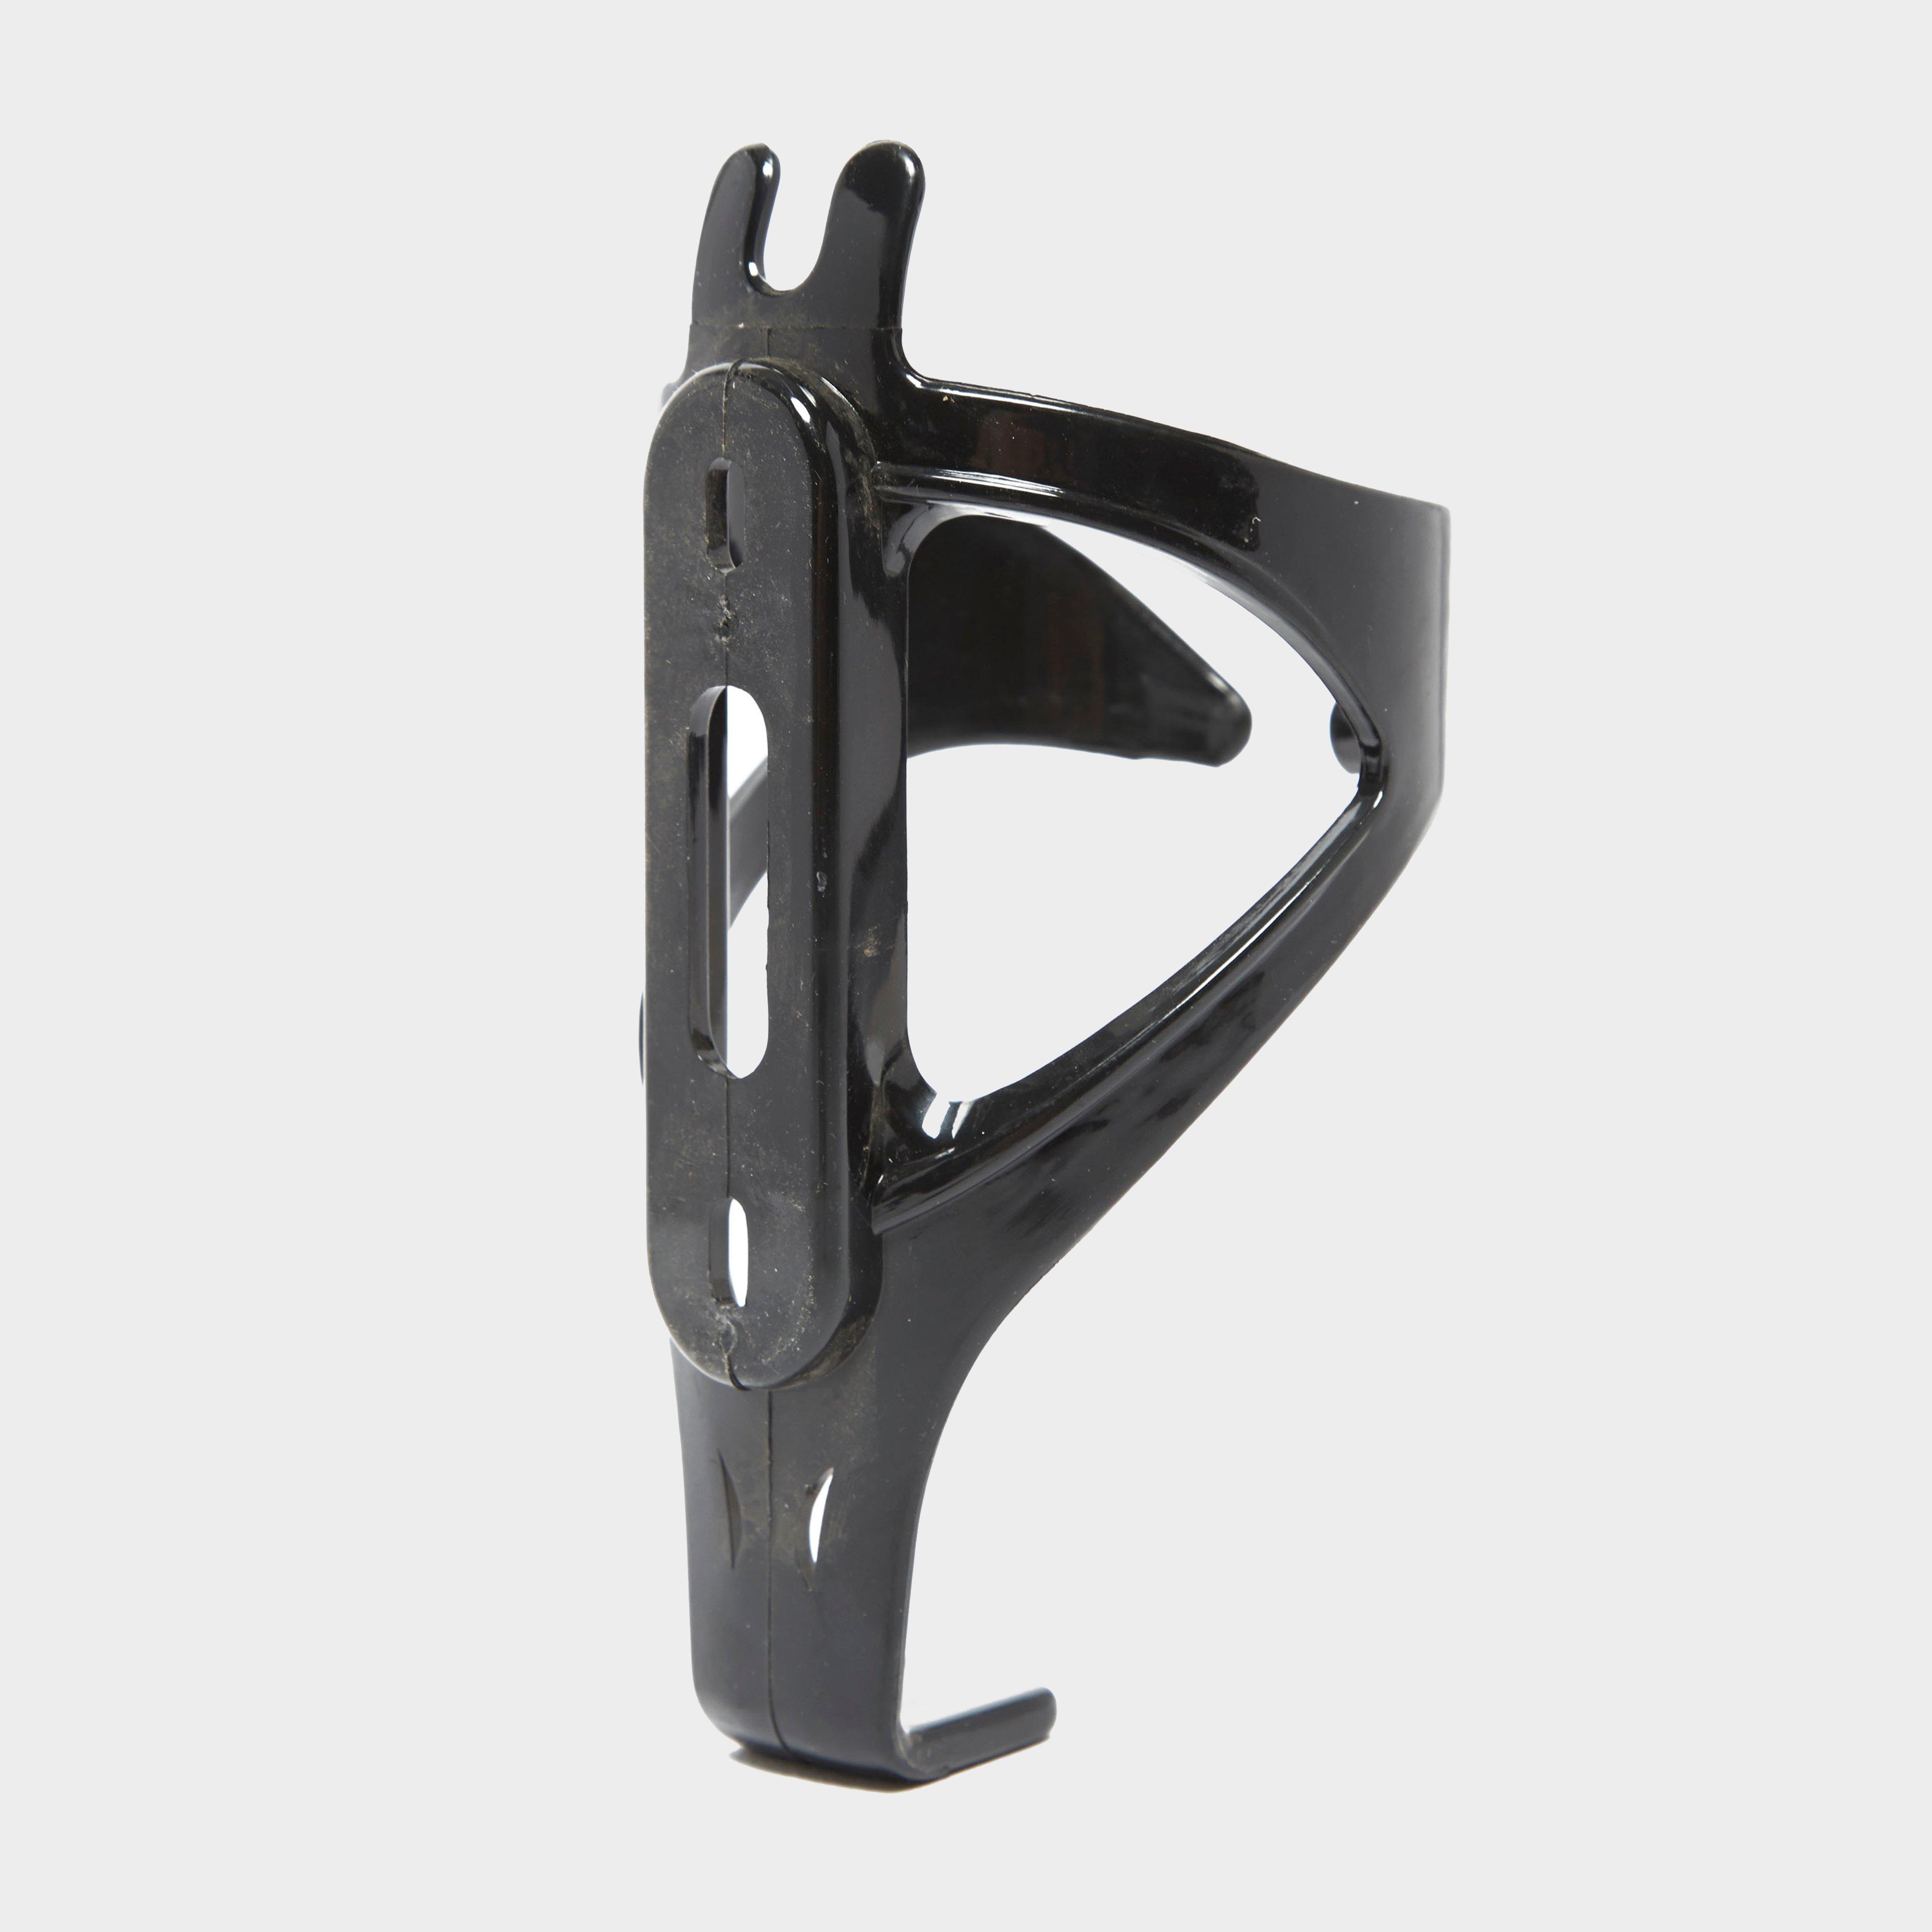 Go Outdoors Clarks Polycarbonate Bottle Cage, Grey